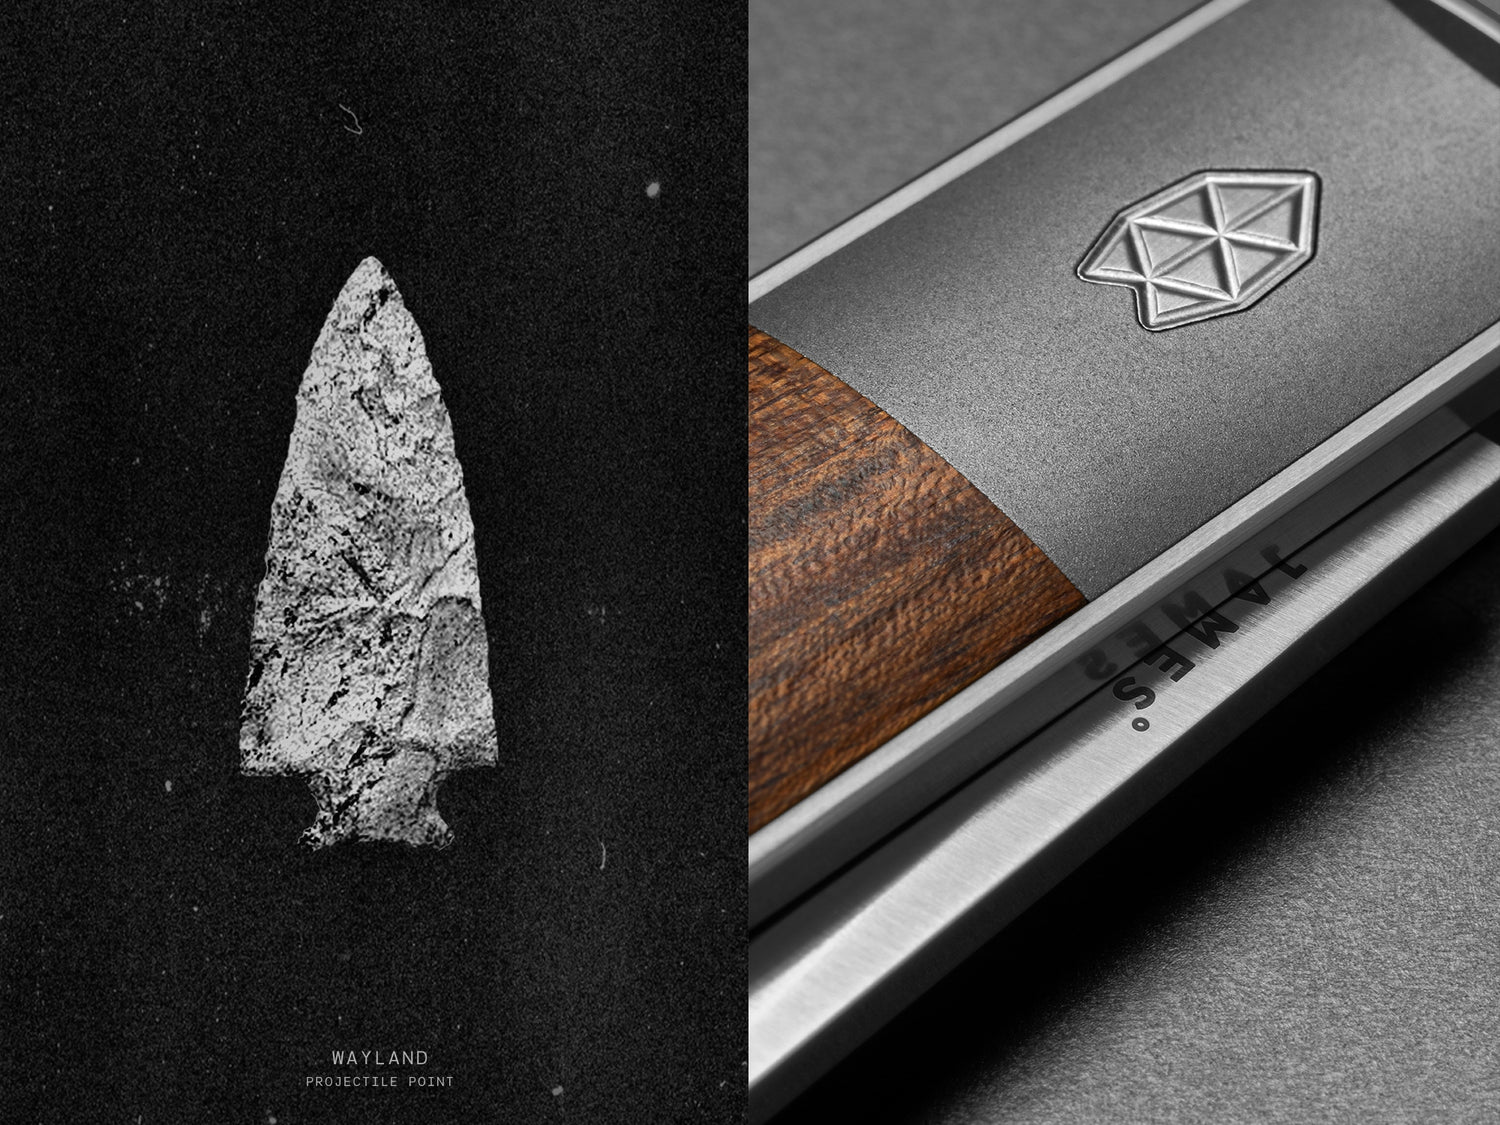 wayland projectile point